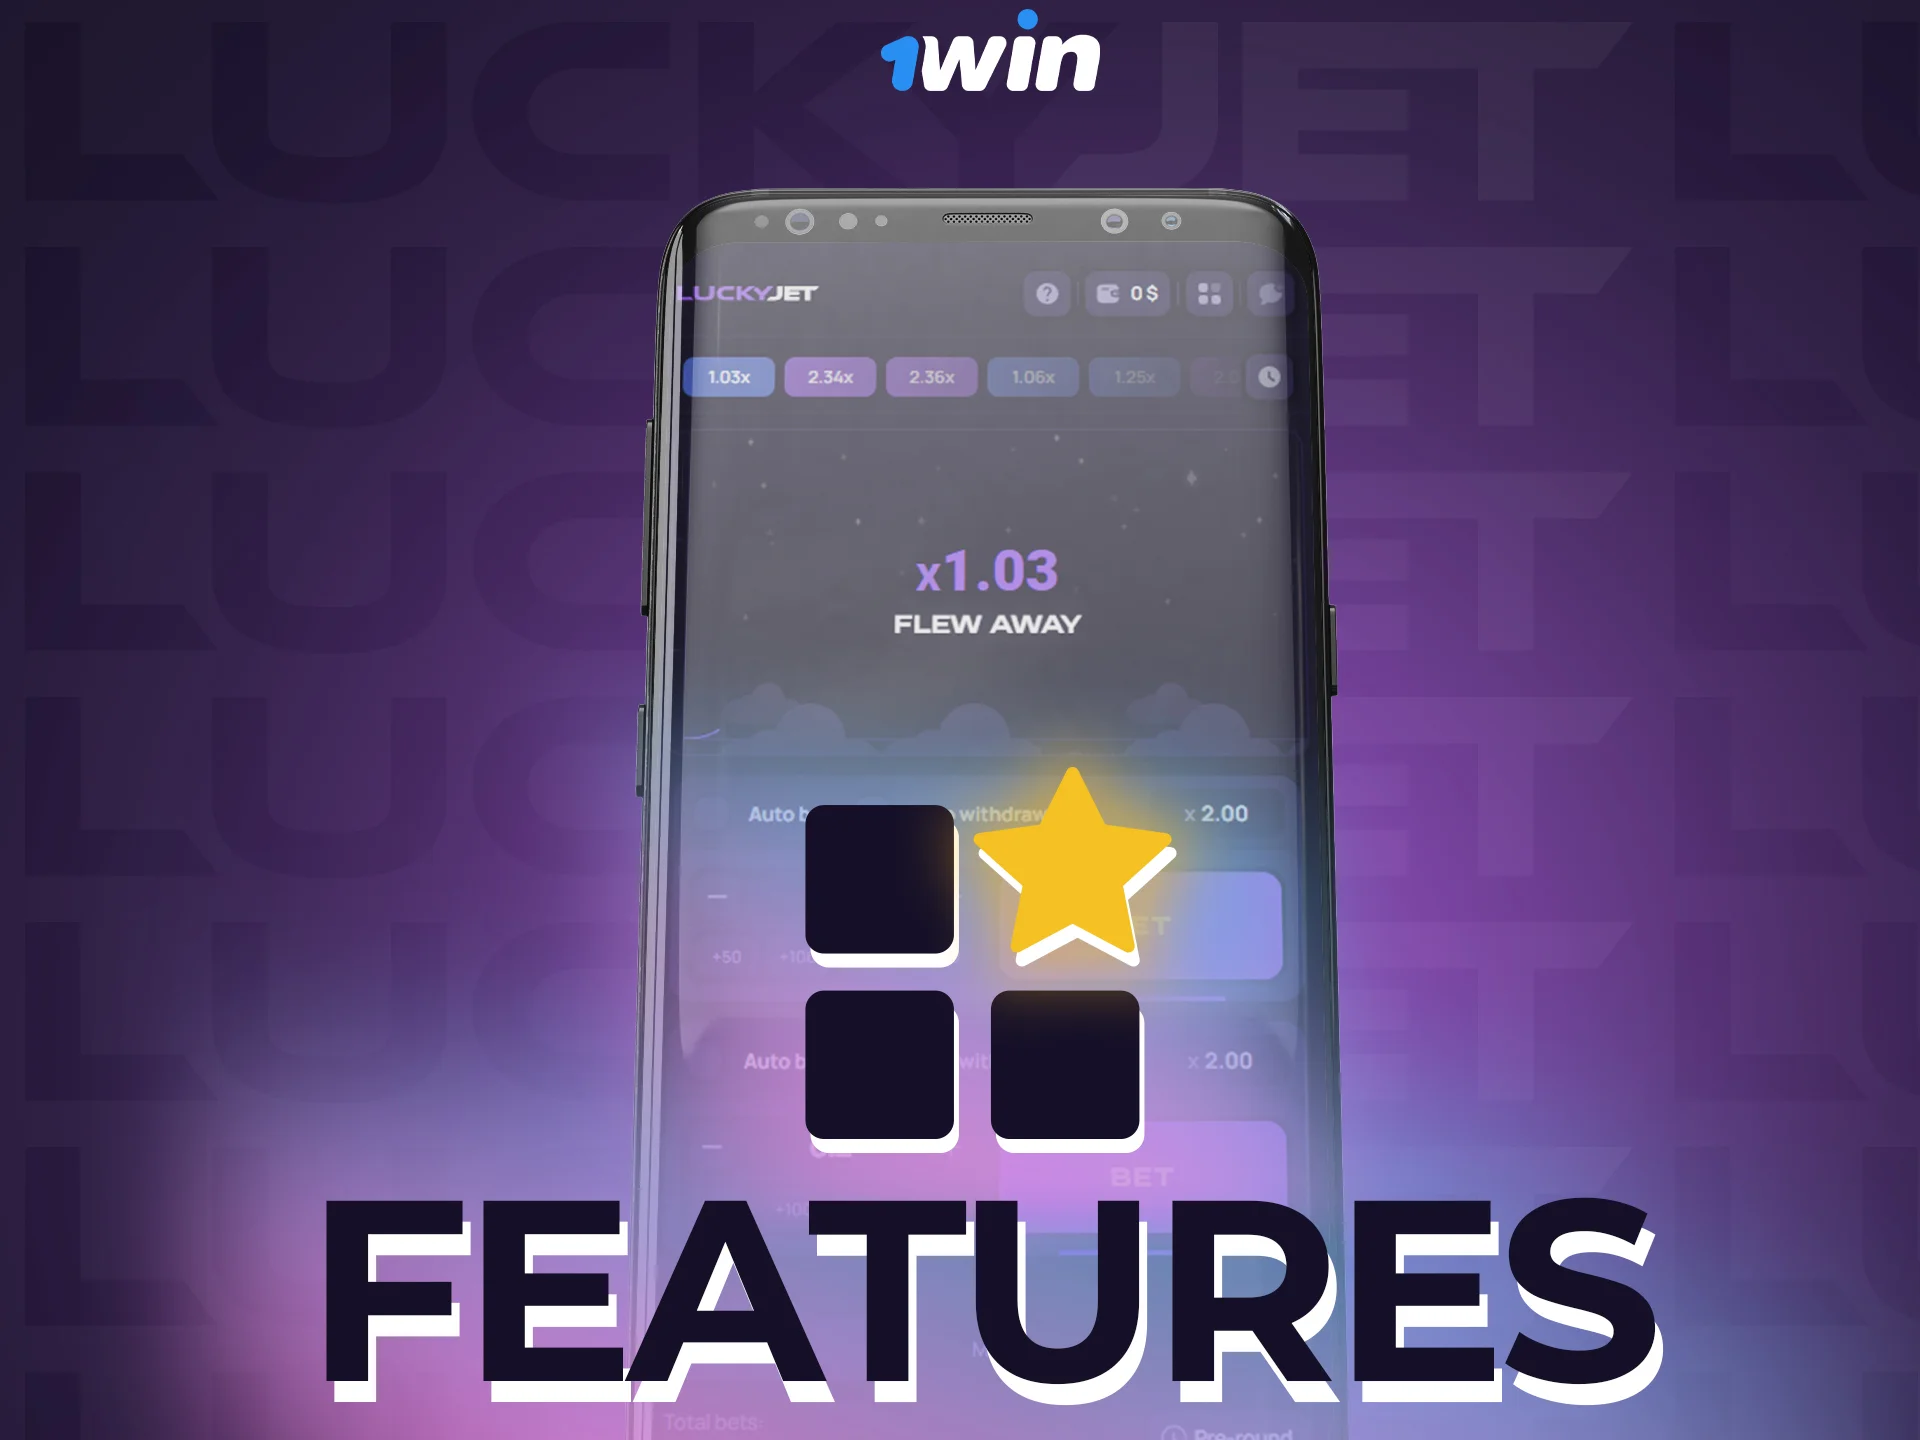 Learn the basic features of the Lucky Jet app at 1win.